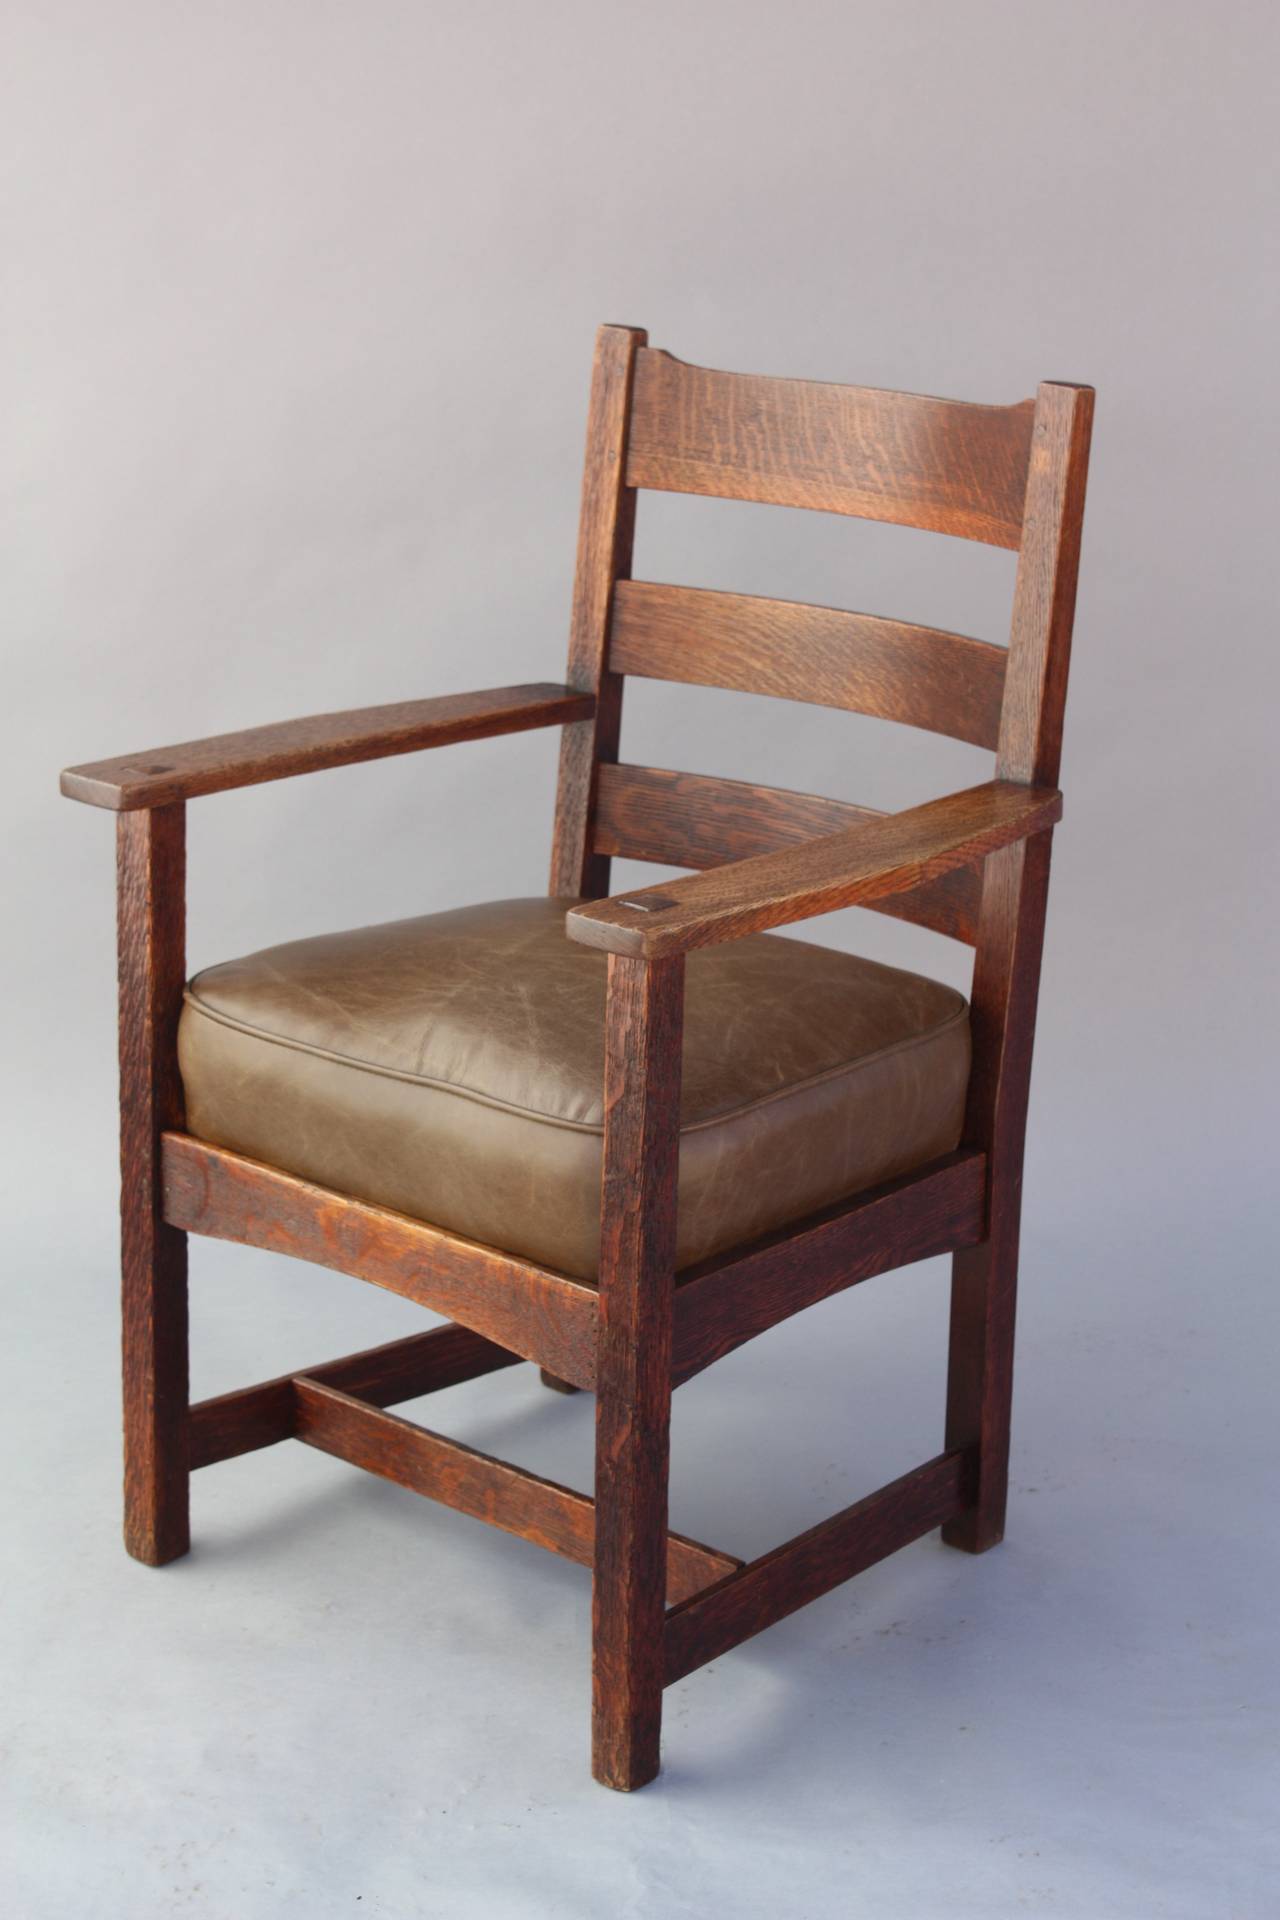 Circa 1910 arts and crafts armchair. New leather seat. Original finish. Quarter sawn oak. Signed. 38 1/8 